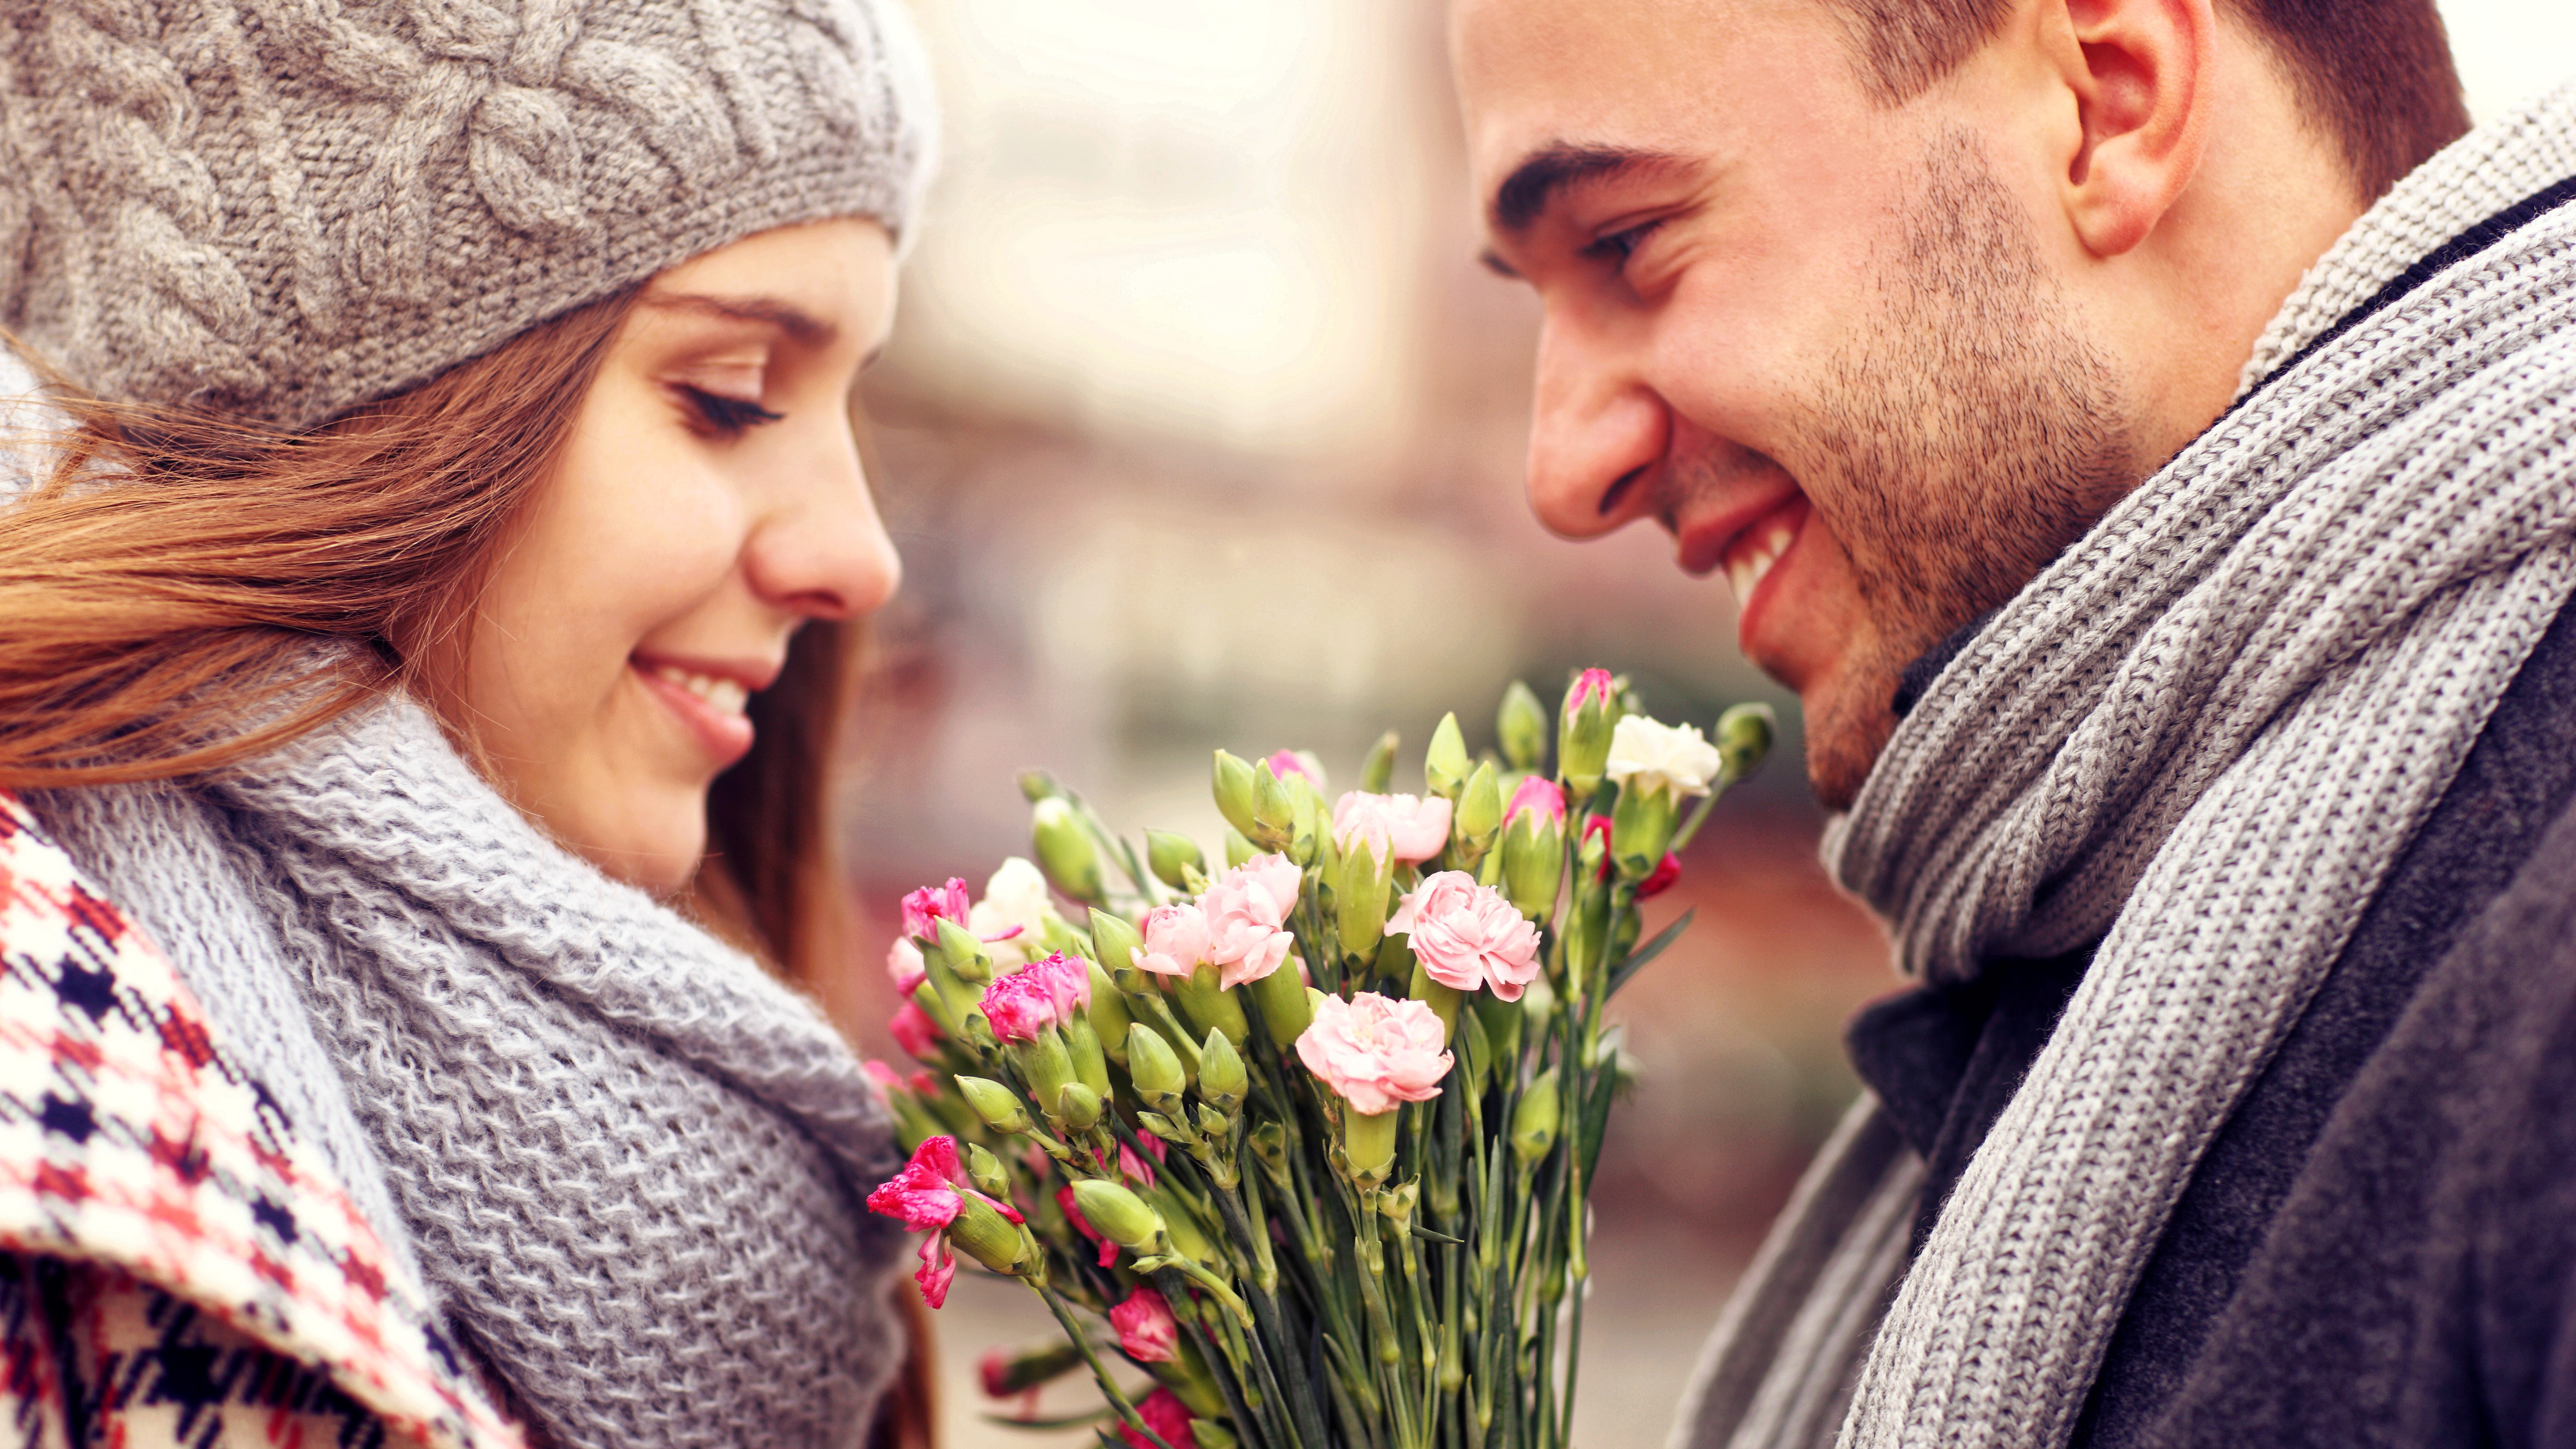 Couple Lovers Love Smiling Emotions Profile Outdoors Happiness Wool Cap Scarf Happy Flowers 5616x3159